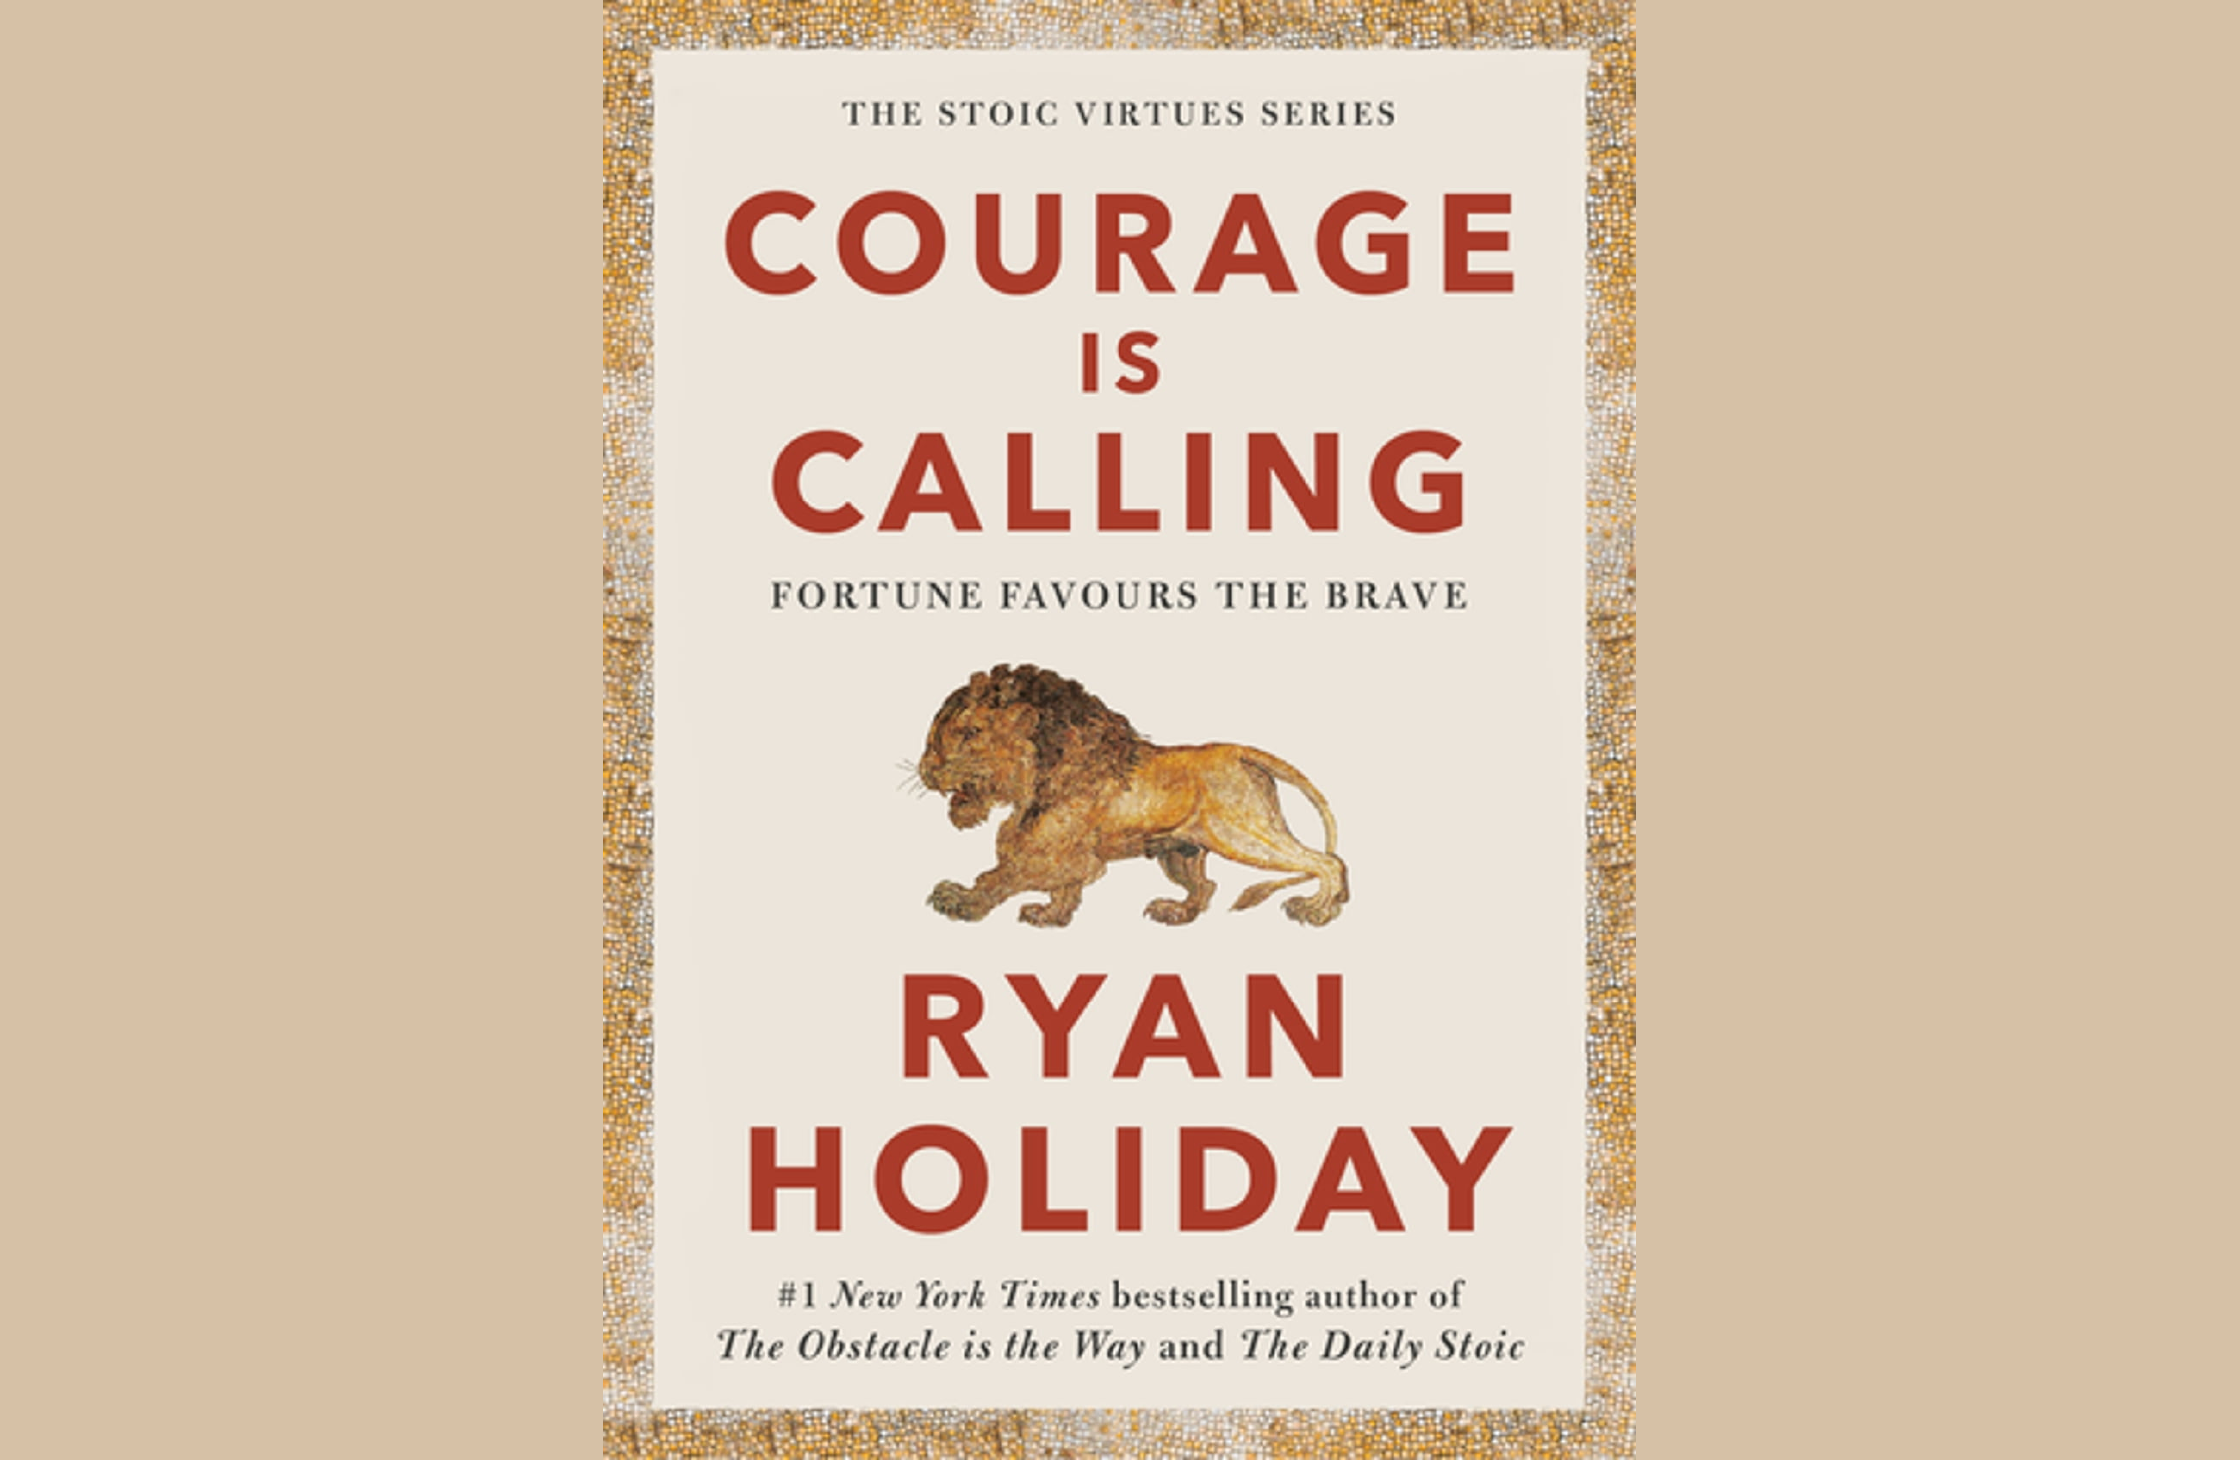 Summary: Courage Is Calling: Fortune Favors the Brave by Ryan Holiday